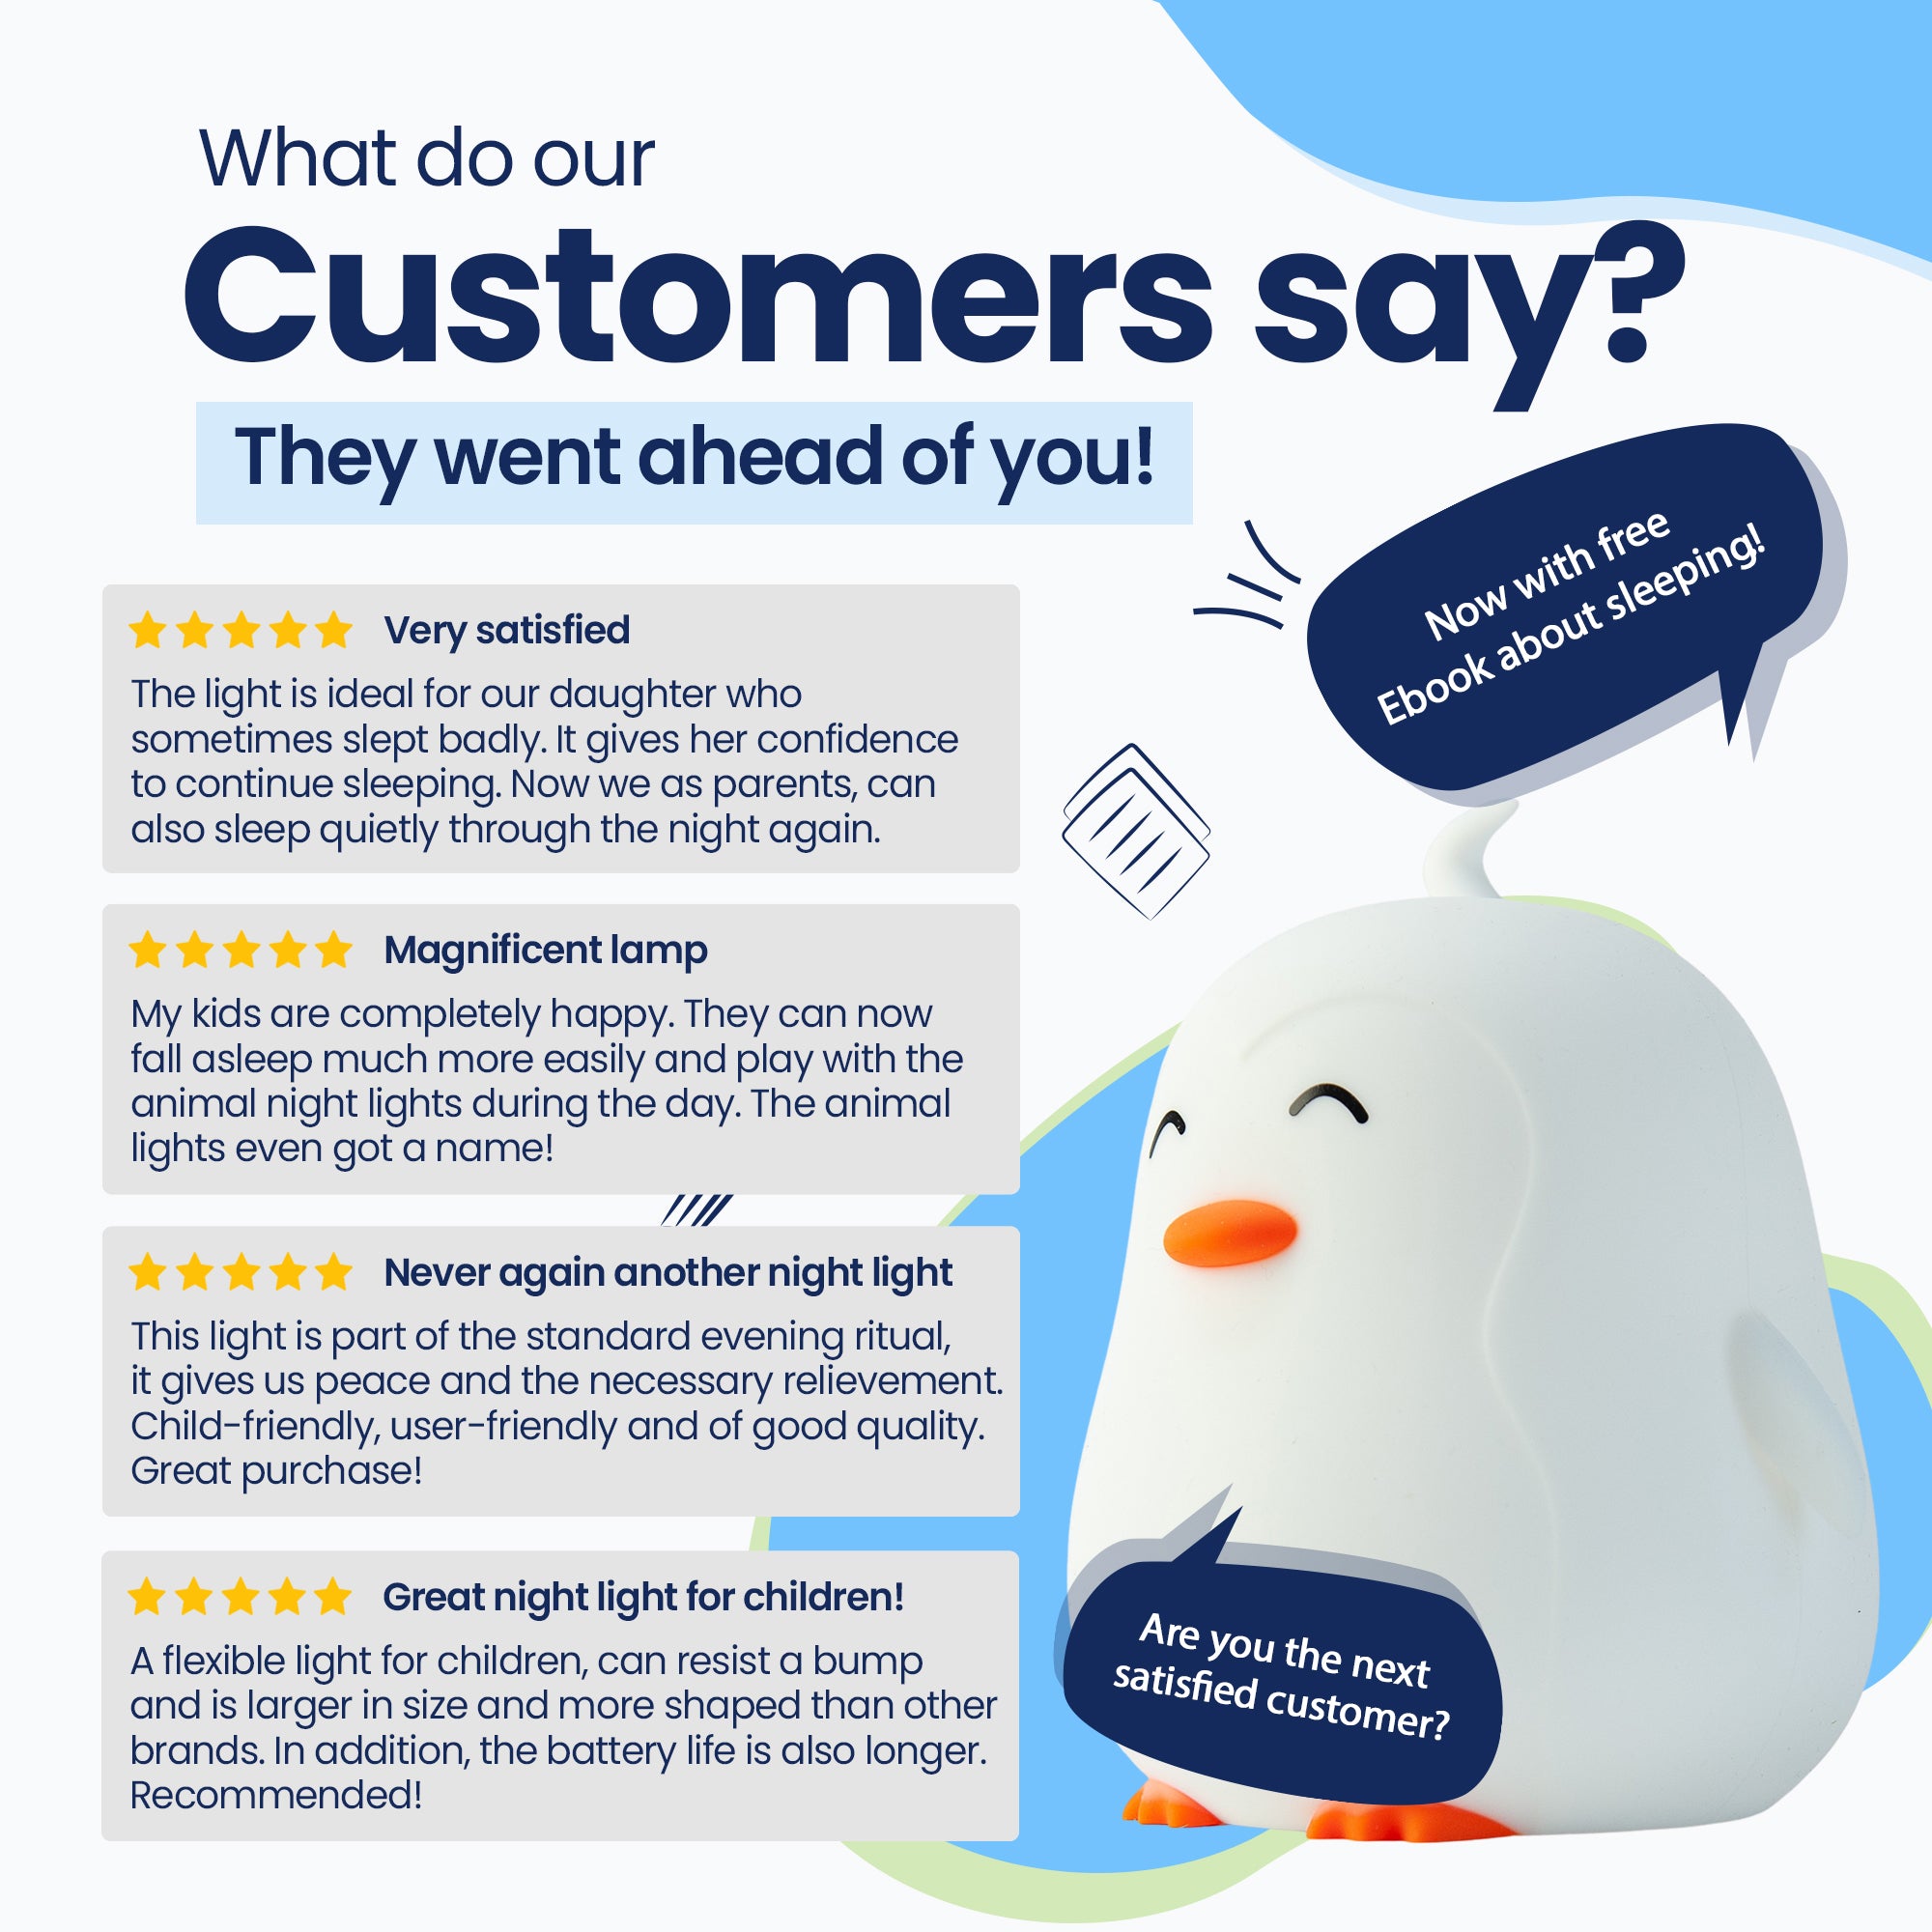 What do our customers say? - They went before you! - Very satisfied - Beautiful lamp - Never again - Super lamp for children! - Now with free E-book about sleeping! - Are you the next satisfied customer?